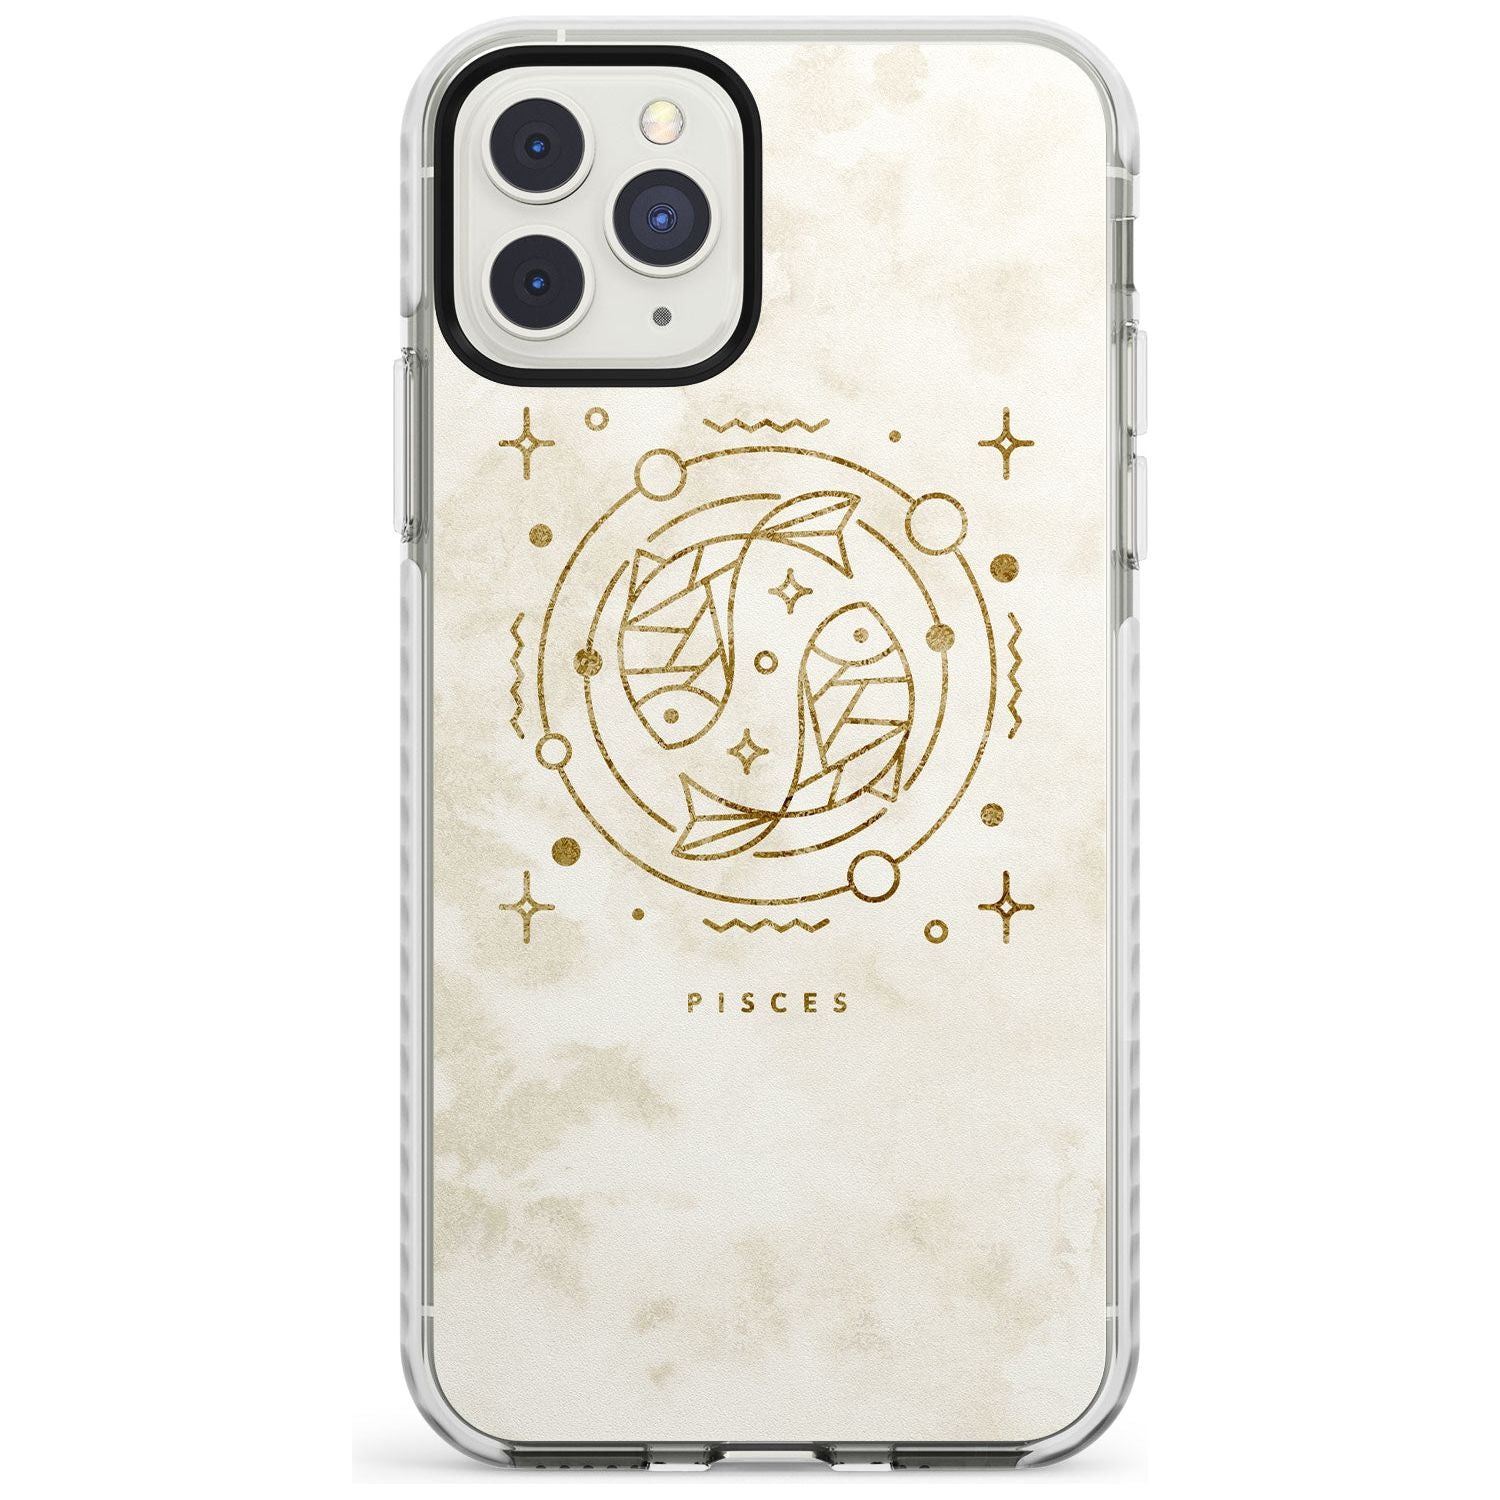 Pisces Emblem - Solid Gold Marbled Design Impact Phone Case for iPhone 11 Pro Max